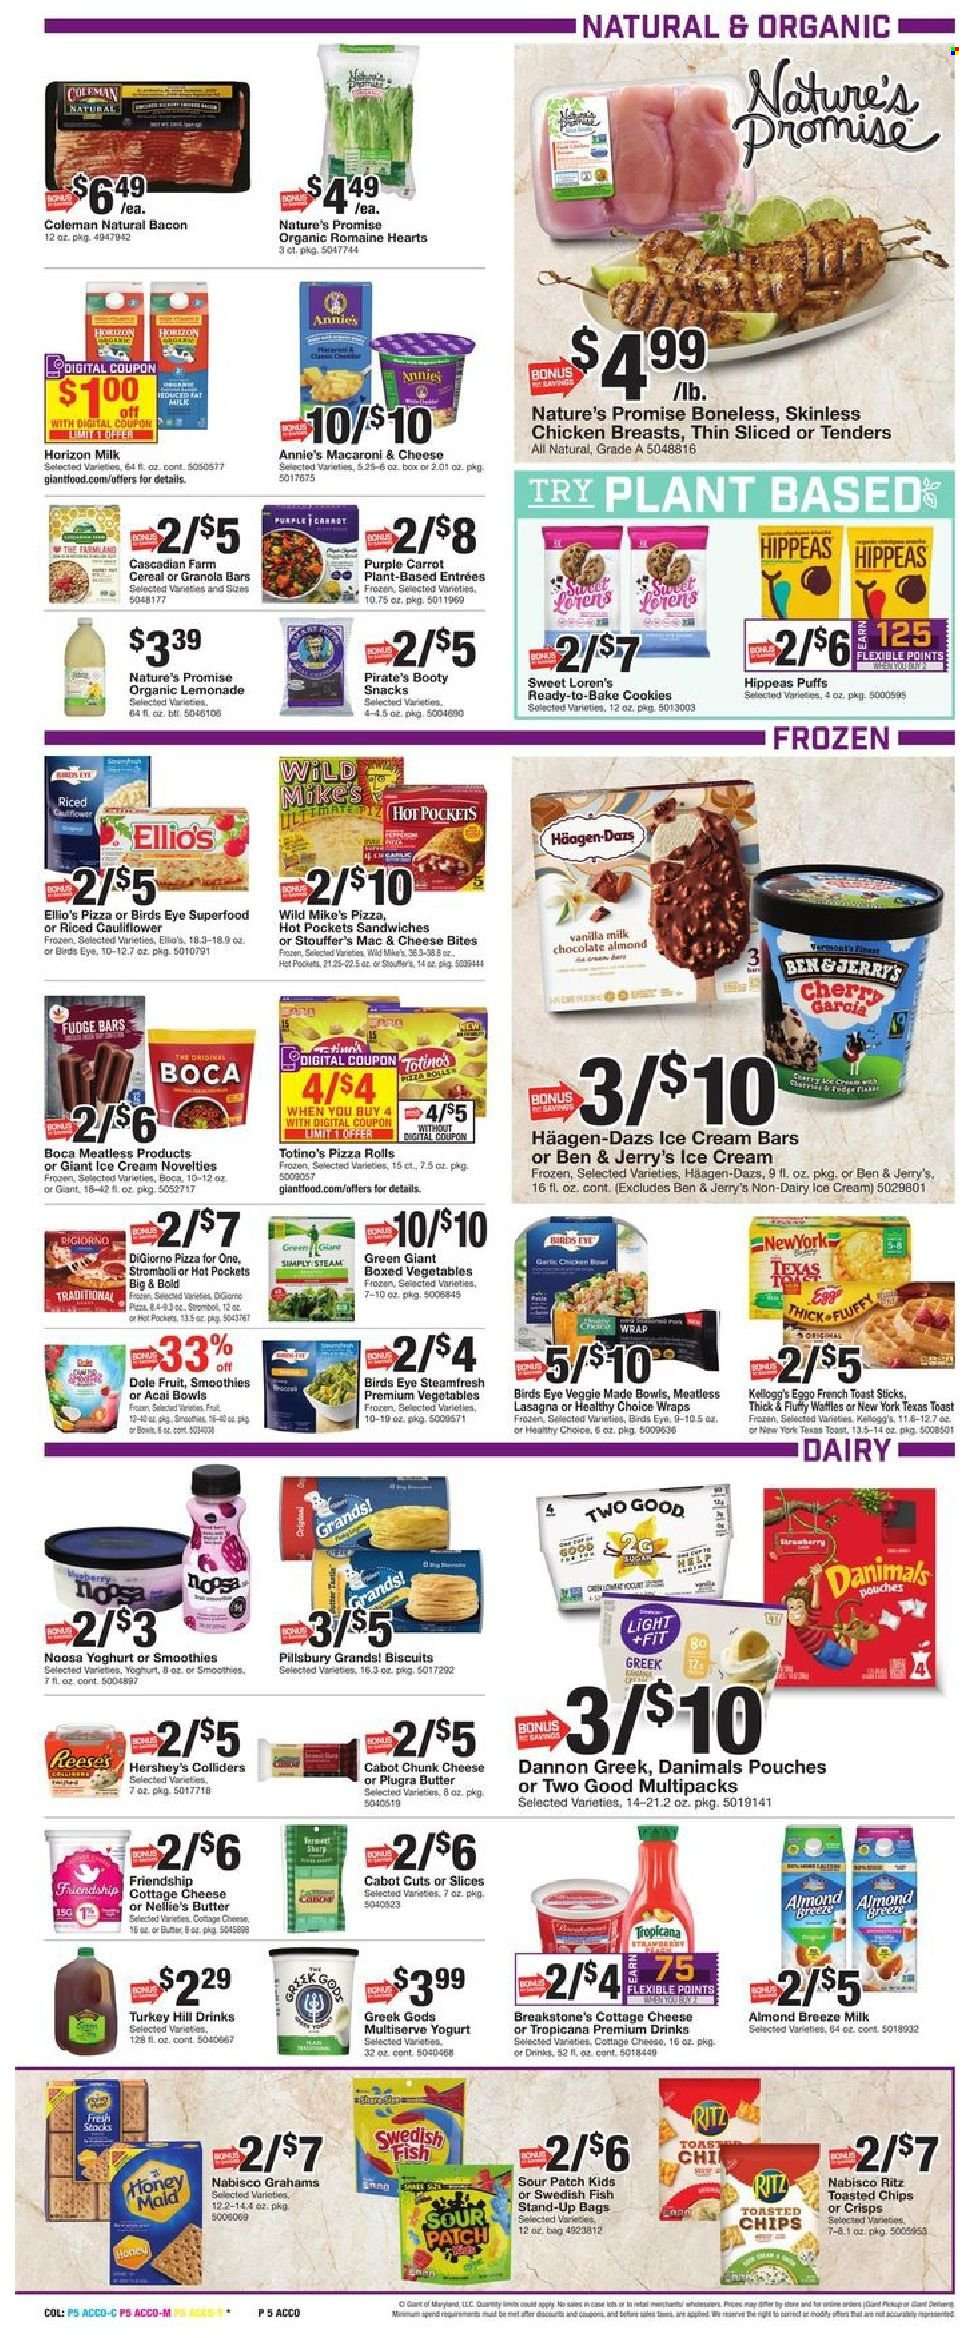 thumbnail - Giant Food Flyer - 09/17/2021 - 09/23/2021 - Sales products - pizza rolls, Nature’s Promise, wraps, puffs, garlic, Dole, hot pocket, pizza, sandwich, macaroni, Bird's Eye, lasagna meal, Healthy Choice, Annie's, bacon, cottage cheese, chunk cheese, yoghurt, Dannon, Danimals, Almond Breeze, butter, ice cream, ice cream bars, Reese's, Hershey's, Häagen-Dazs, Ben & Jerry's, Stouffer's, cookies, fudge, snack, Kellogg's, biscuit, sour patch, RITZ, cereals, granola bar, Honey Maid, lemonade, chicken breasts. Page 5.